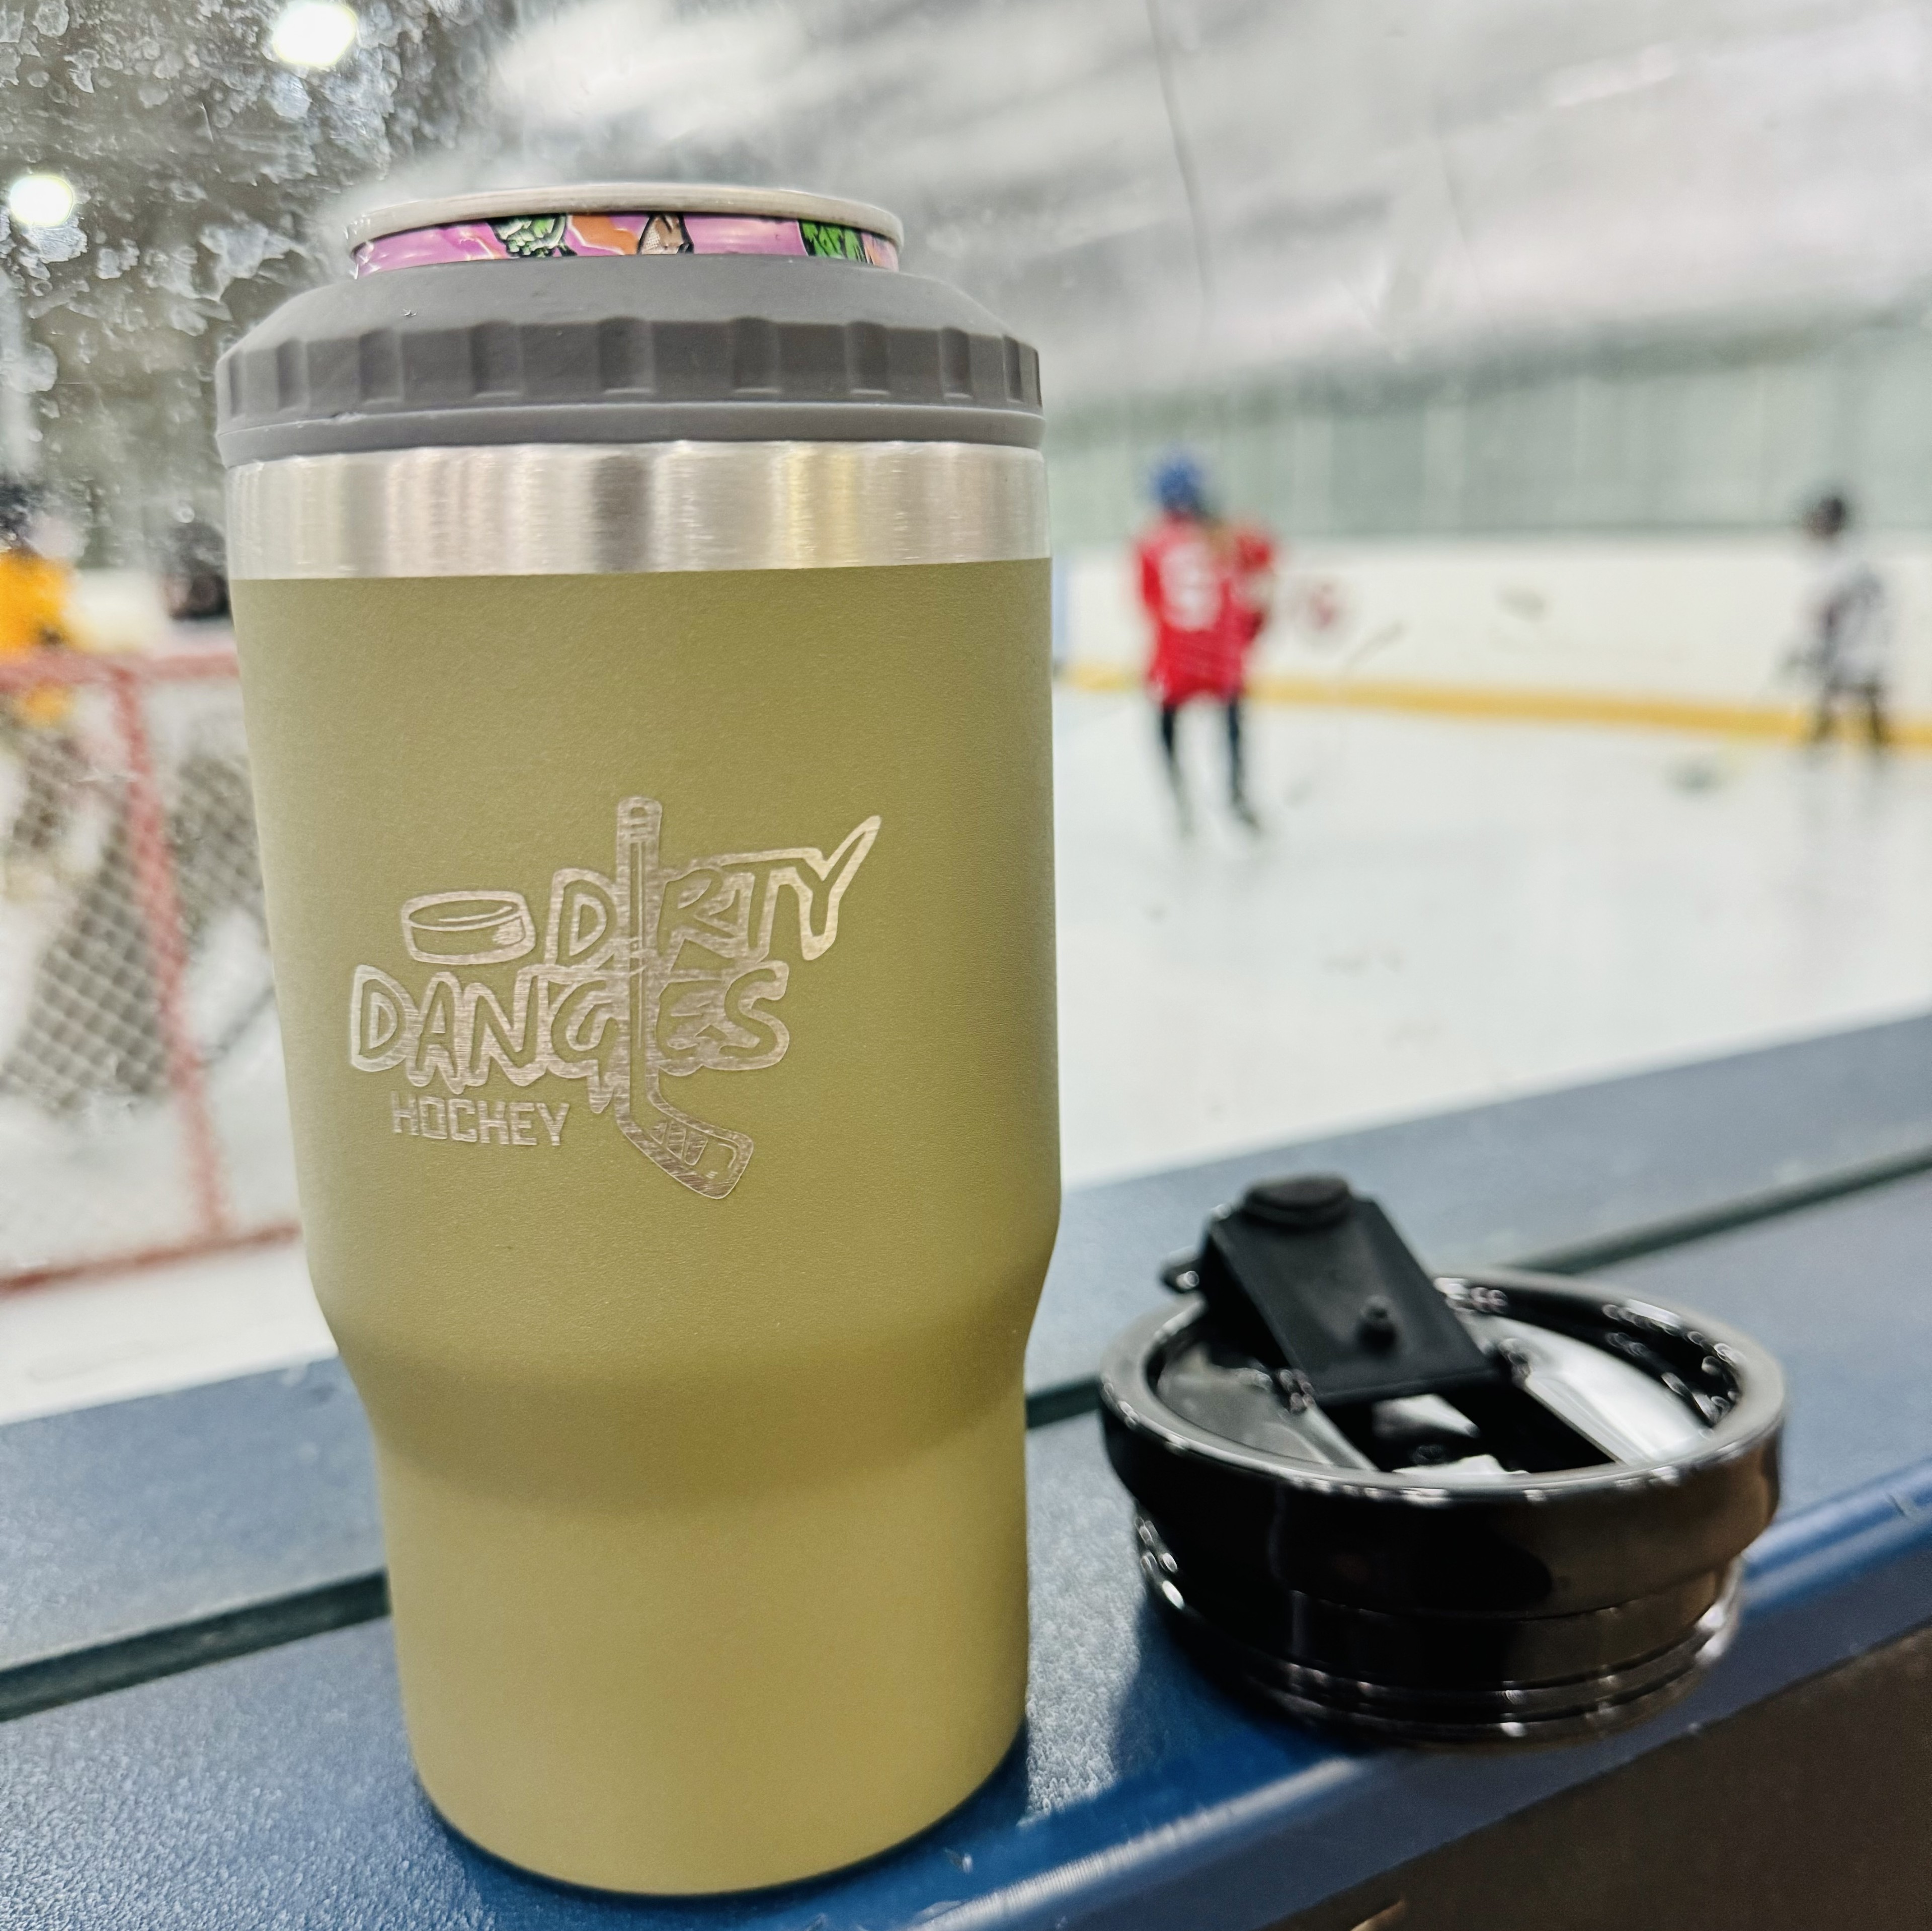 A tactical green dirty dangles 4 in 1 drink tumbler can cooler in an ice rink